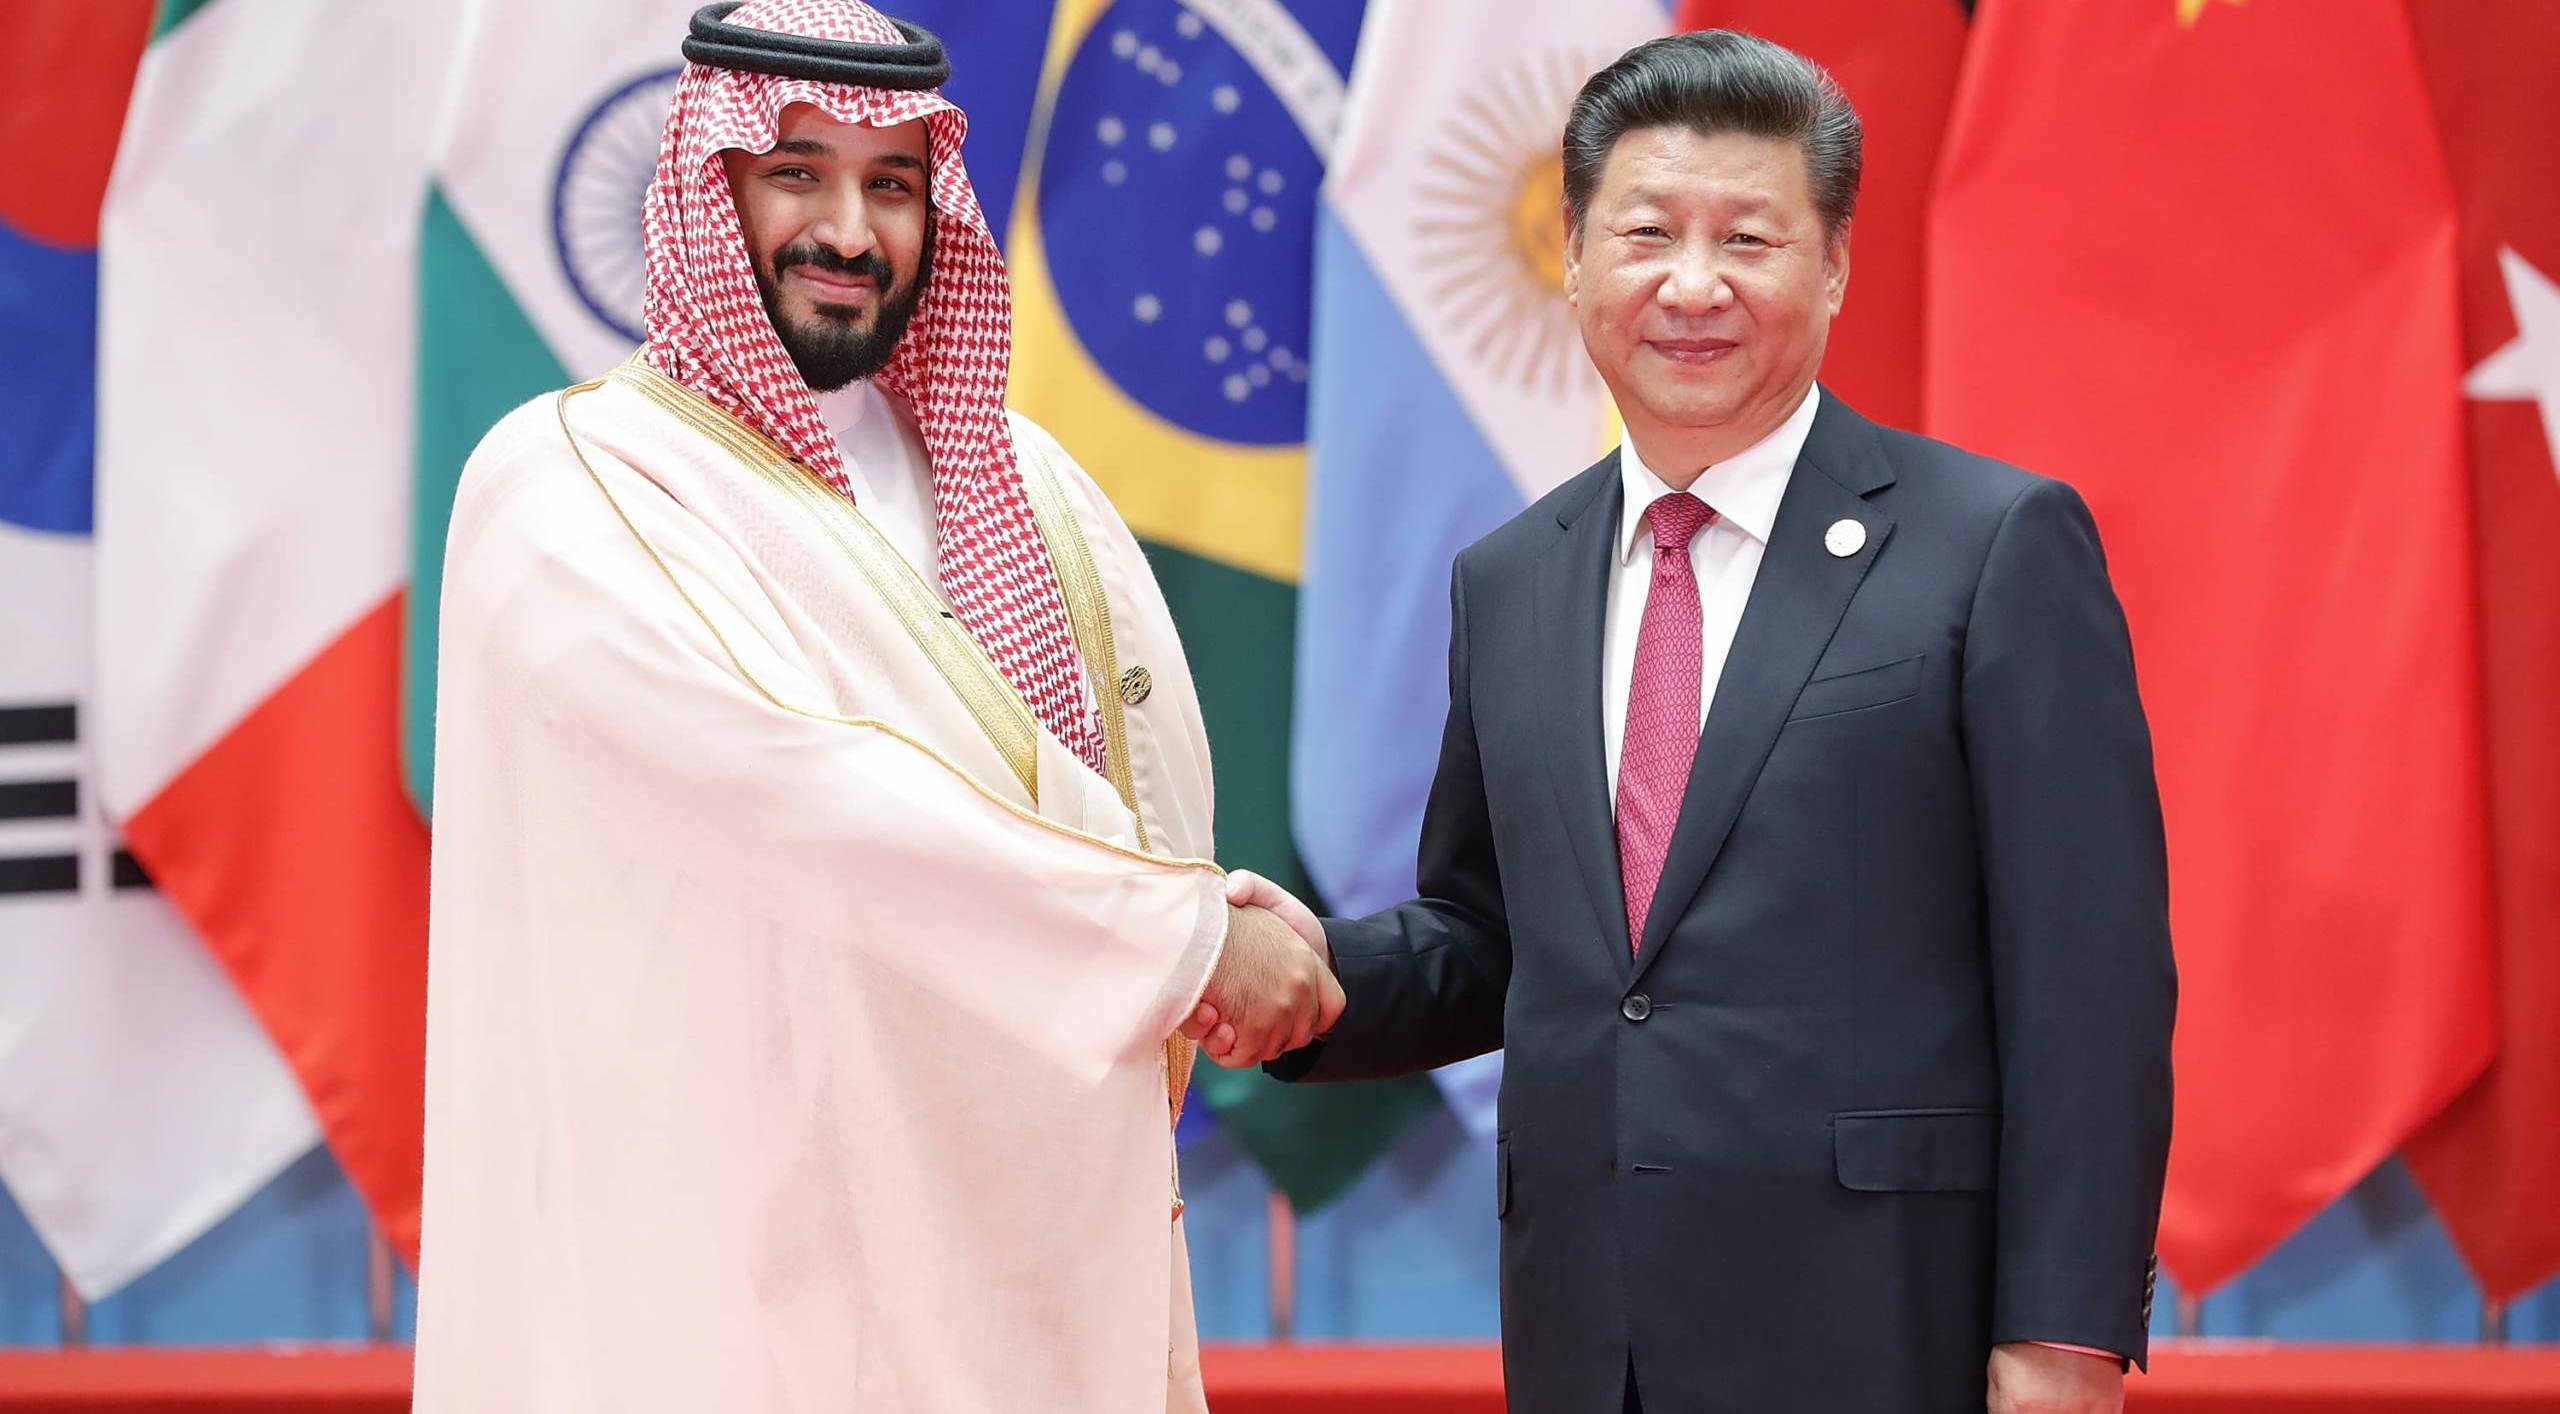 The Biden Factor: Saudi Arabia Is in Discussions to Join the BRICS Coalition with China and Russia and Move Away from US with Potentially Explosive Consequences